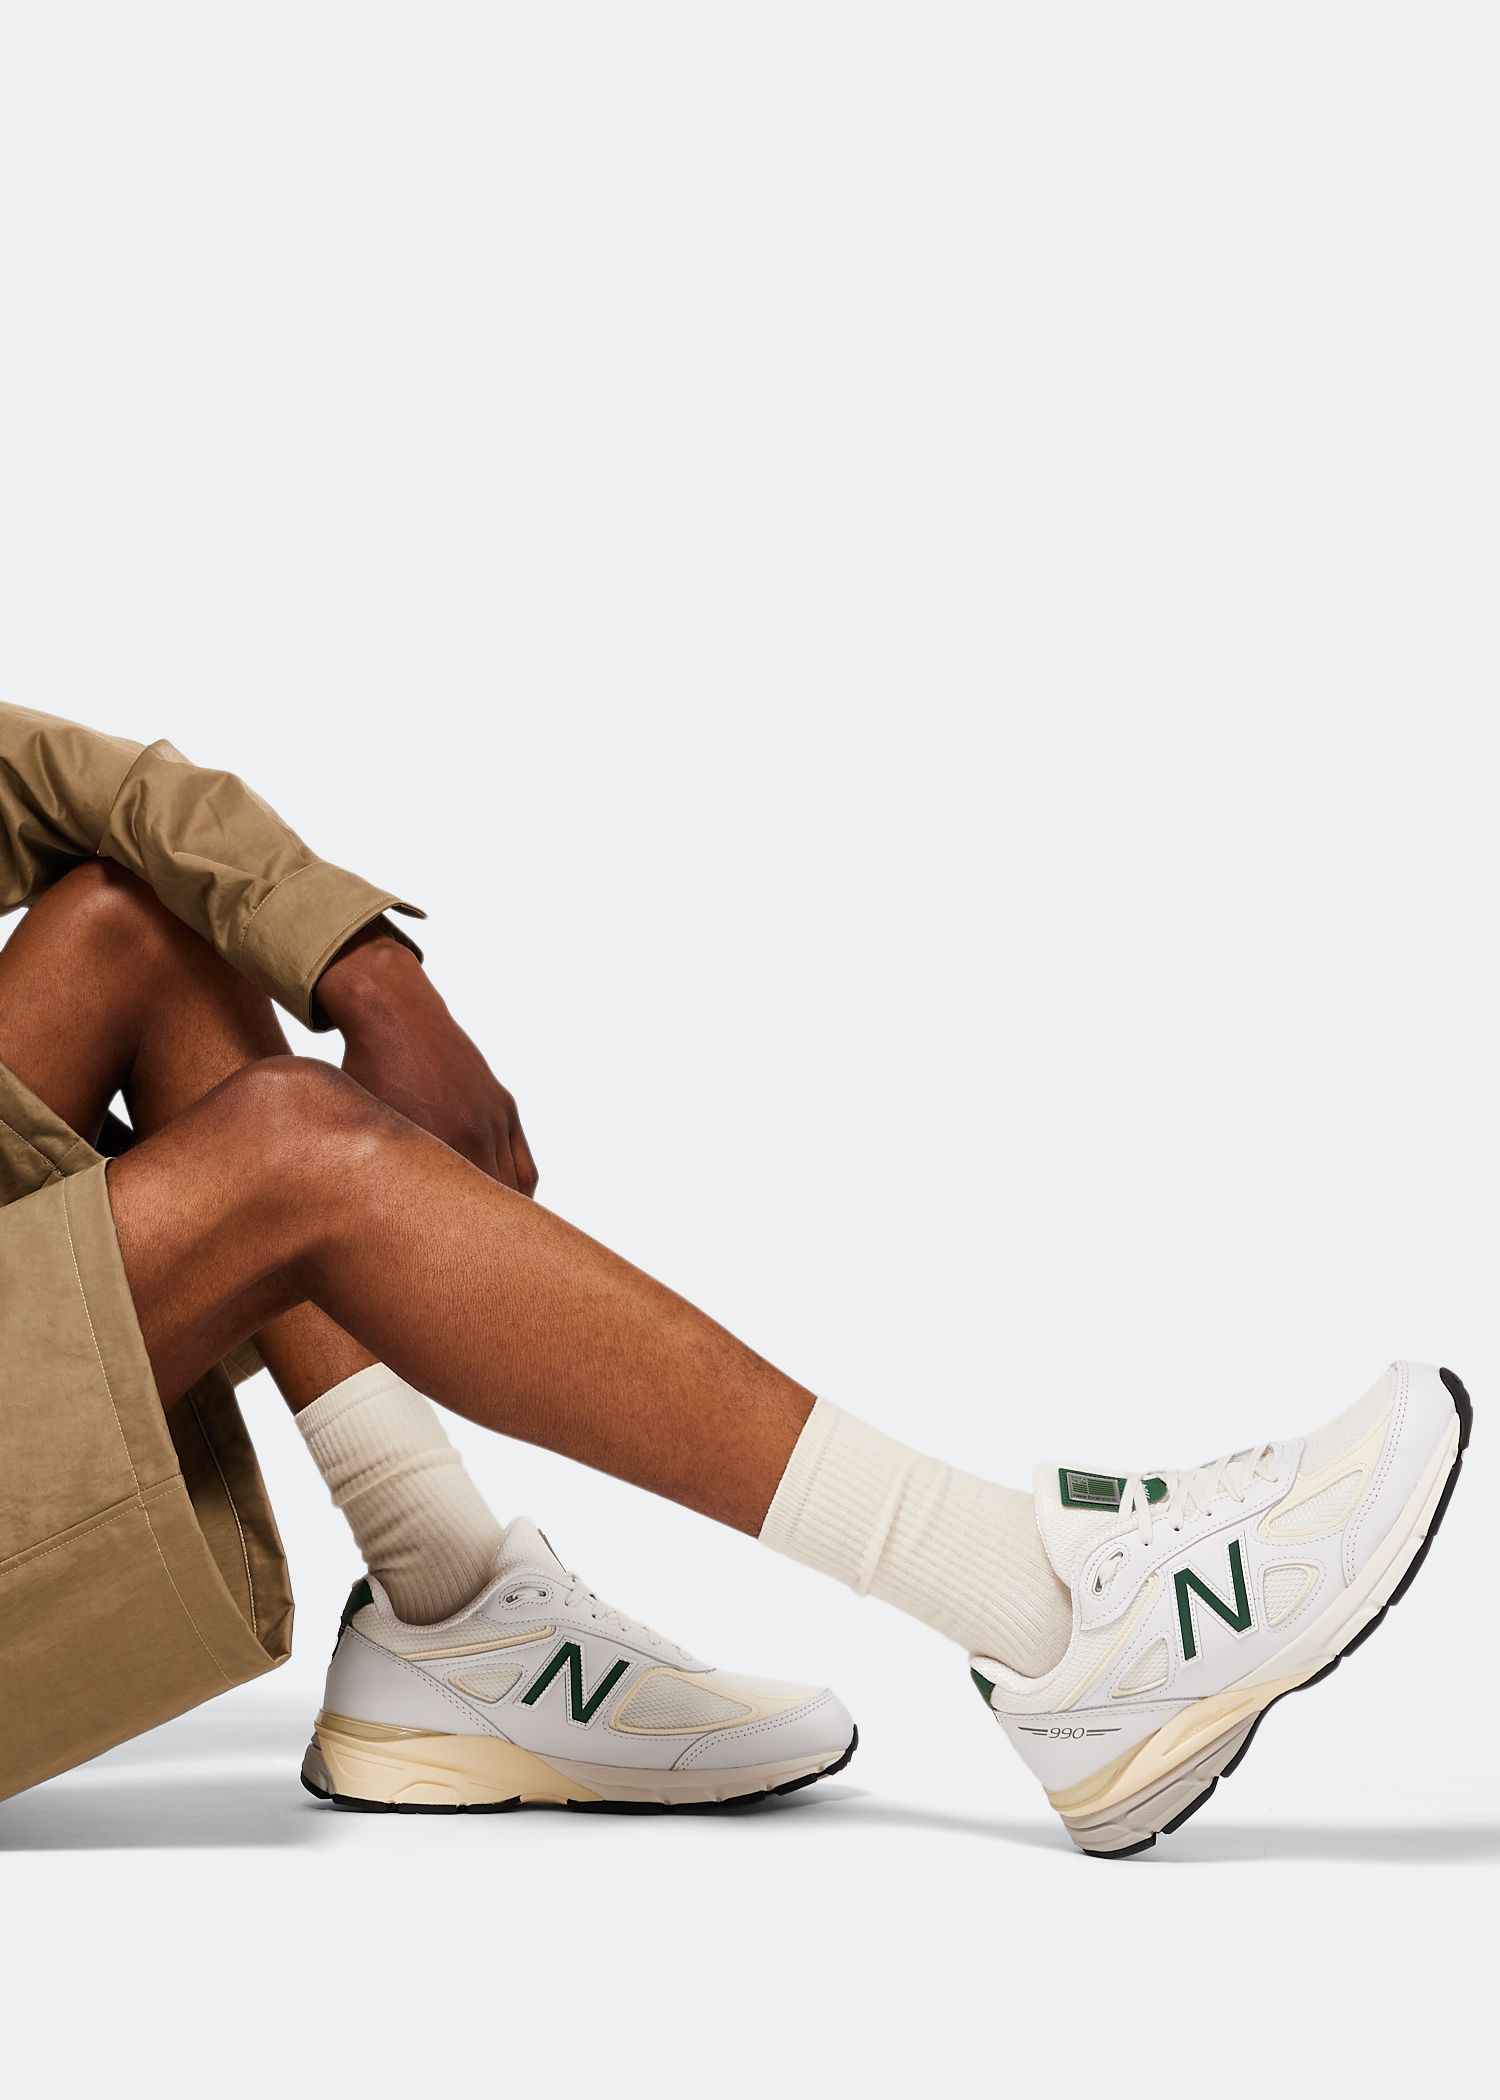 The Made in USA New Balance 990v4 Appears in White and Green